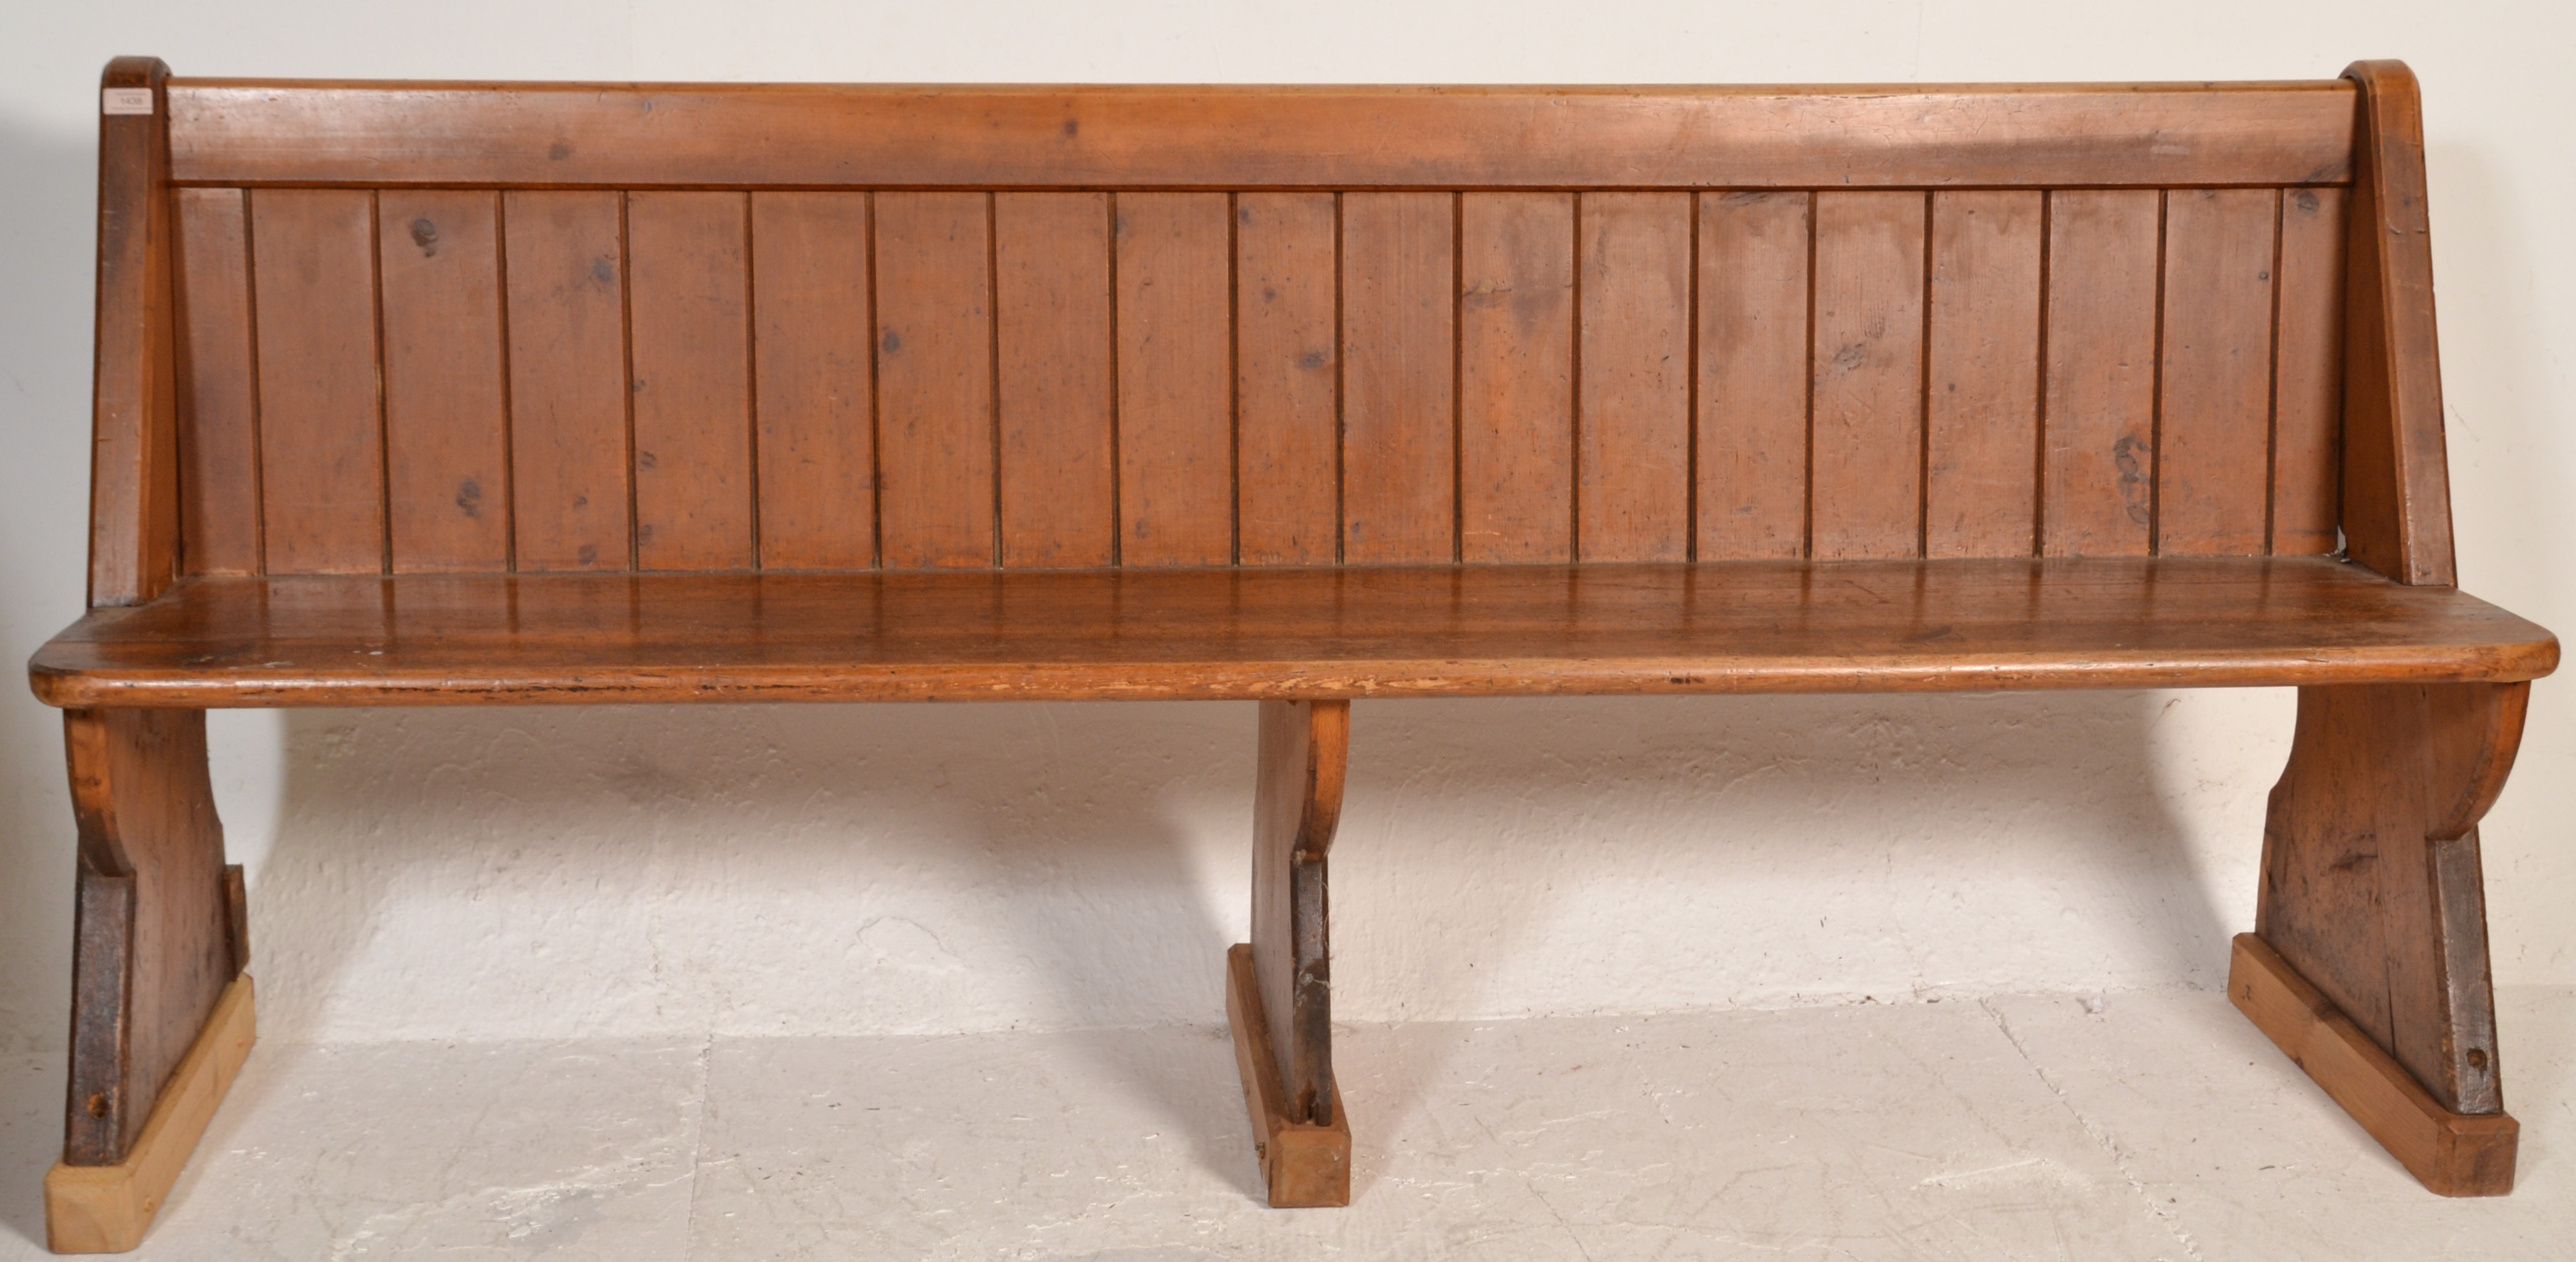 A Victorian 19th century Gothic Arts & Crafts solid oak pew bench of ecclesiastical form being - Image 2 of 6